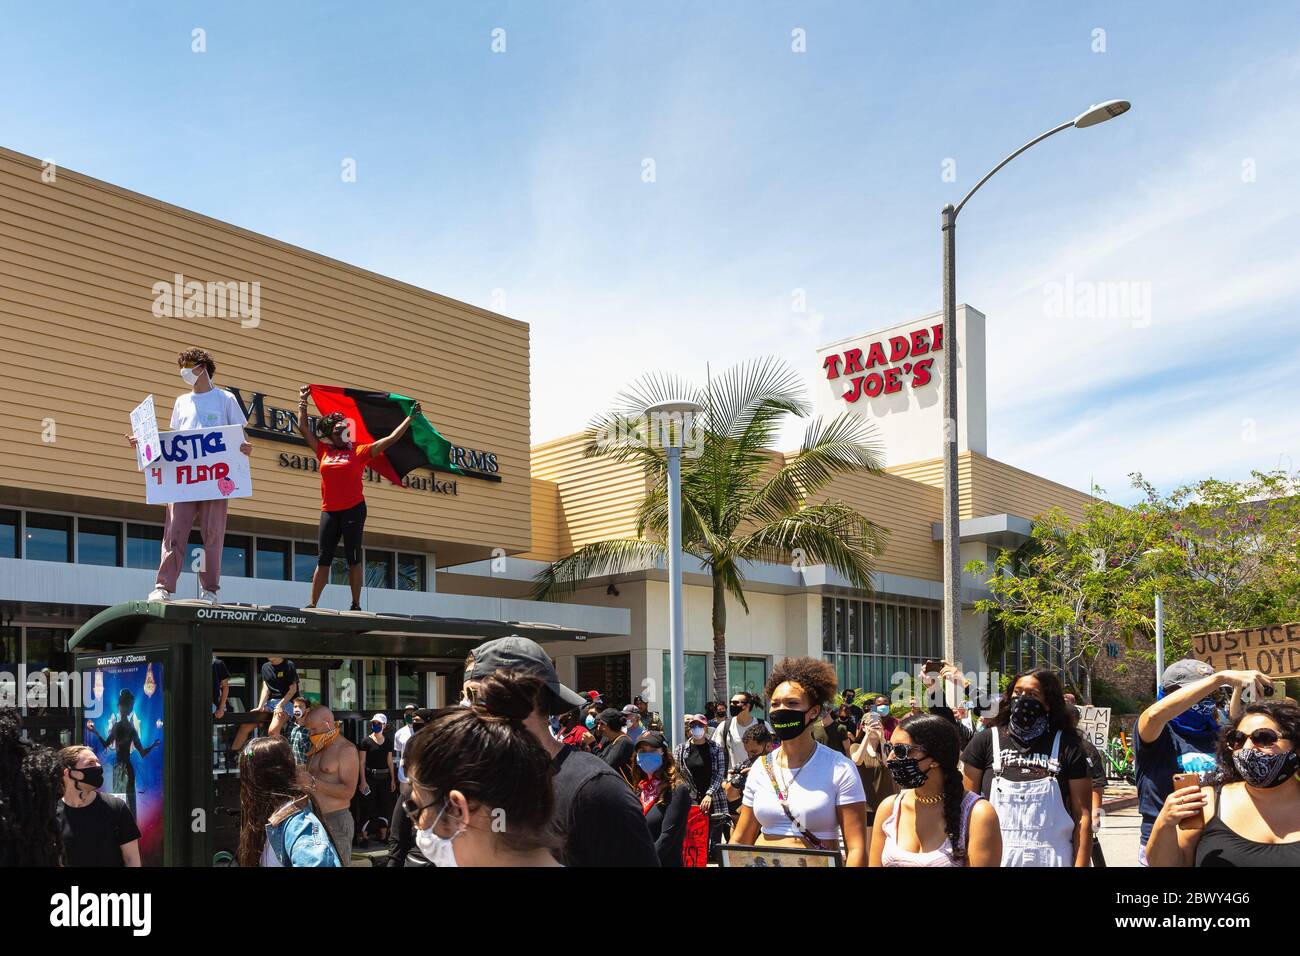 Black Lives Matter protest over the killing of George Floyd by police officers: Fairfax District, Los Angeles, CA, USA - May 30, 2020 Stock Photo